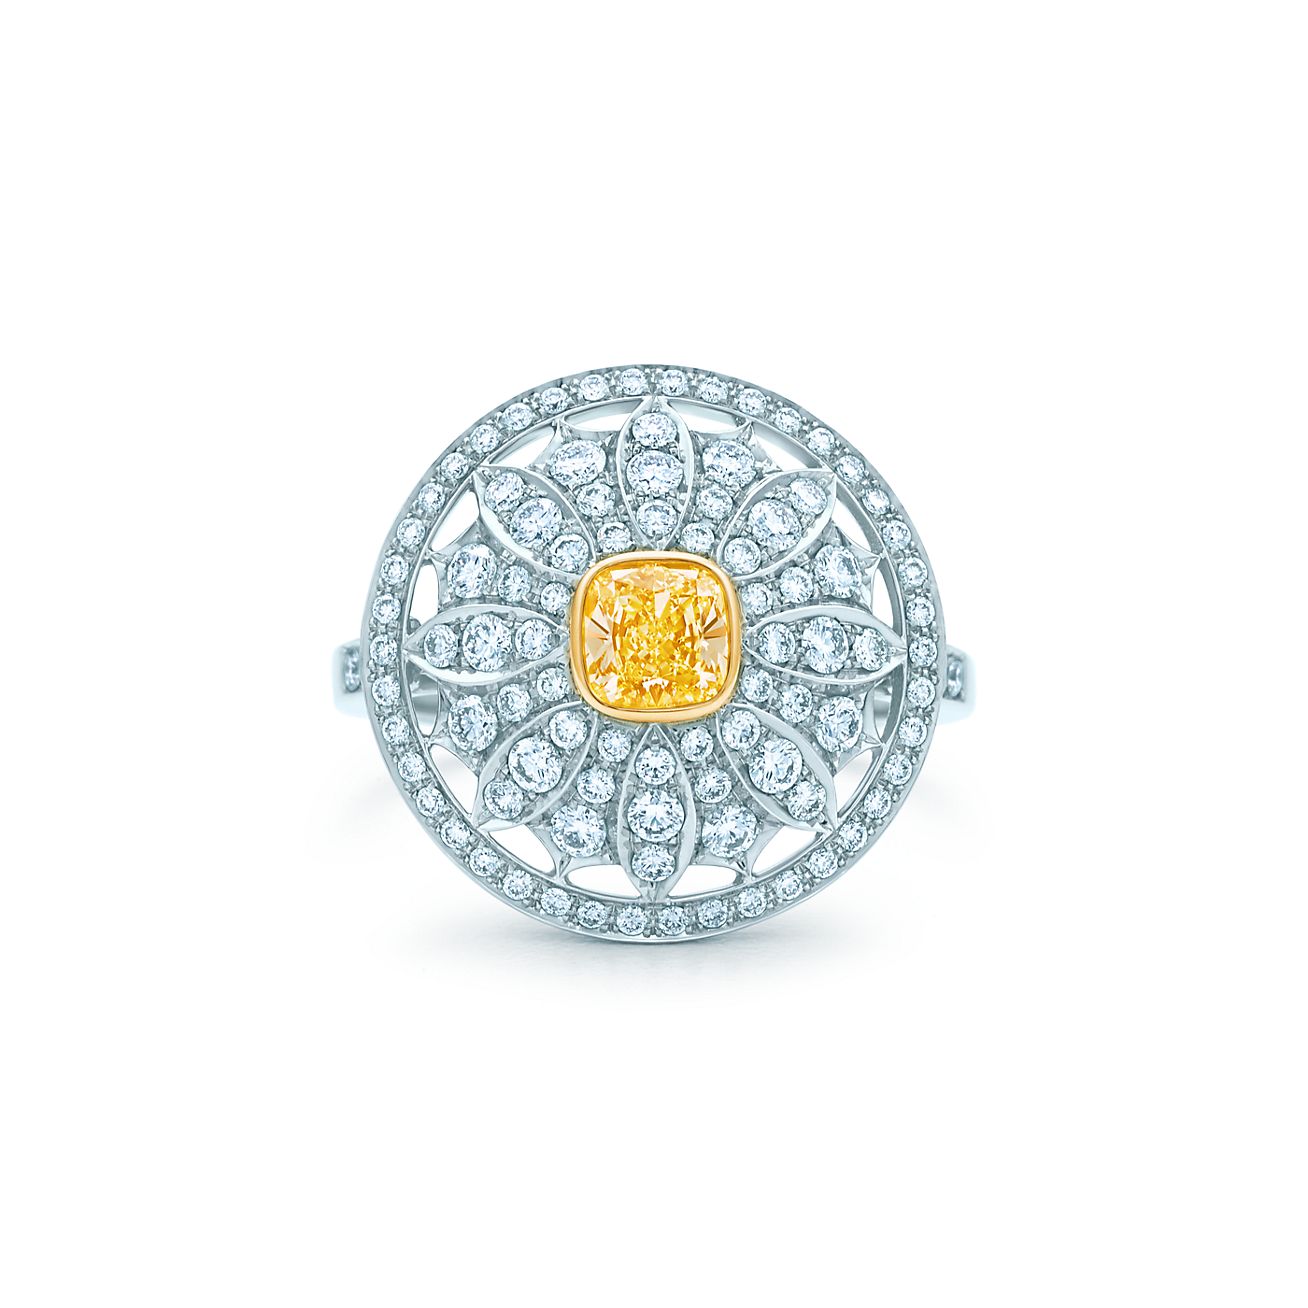 Daisy ring in platinum and 18k gold 